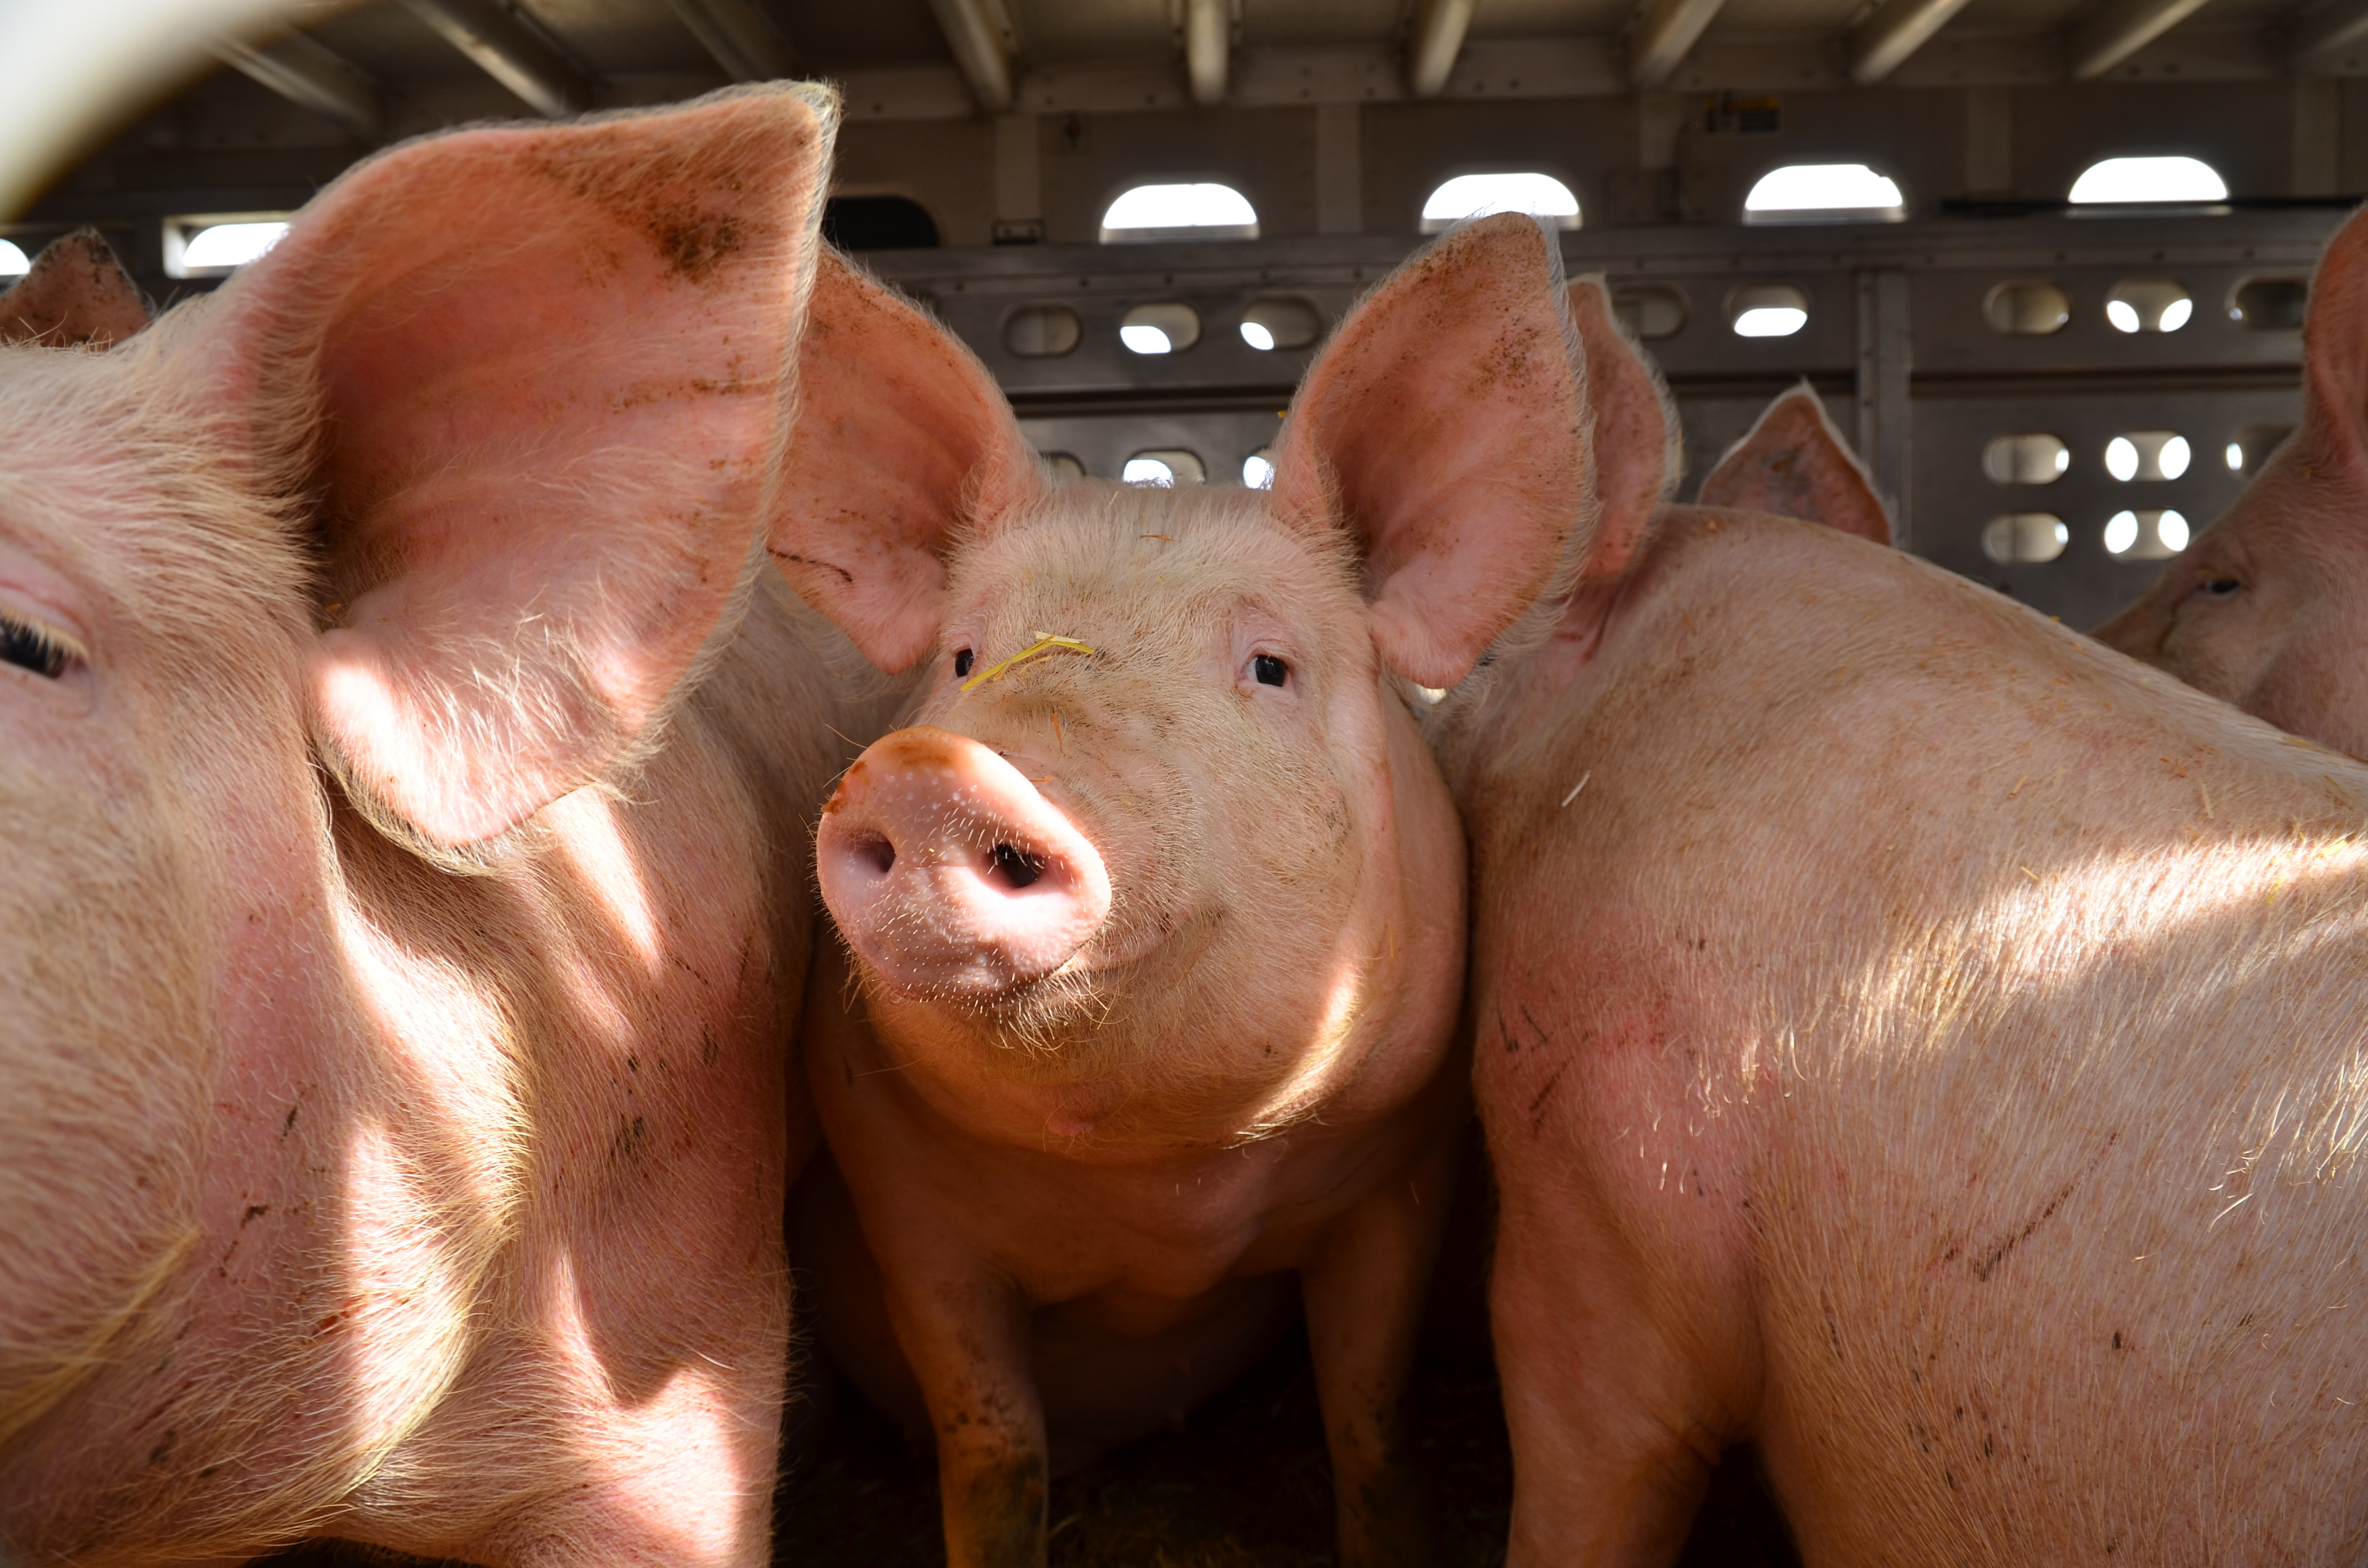 Transport has emerged as a significant welfare concern for the swine industry